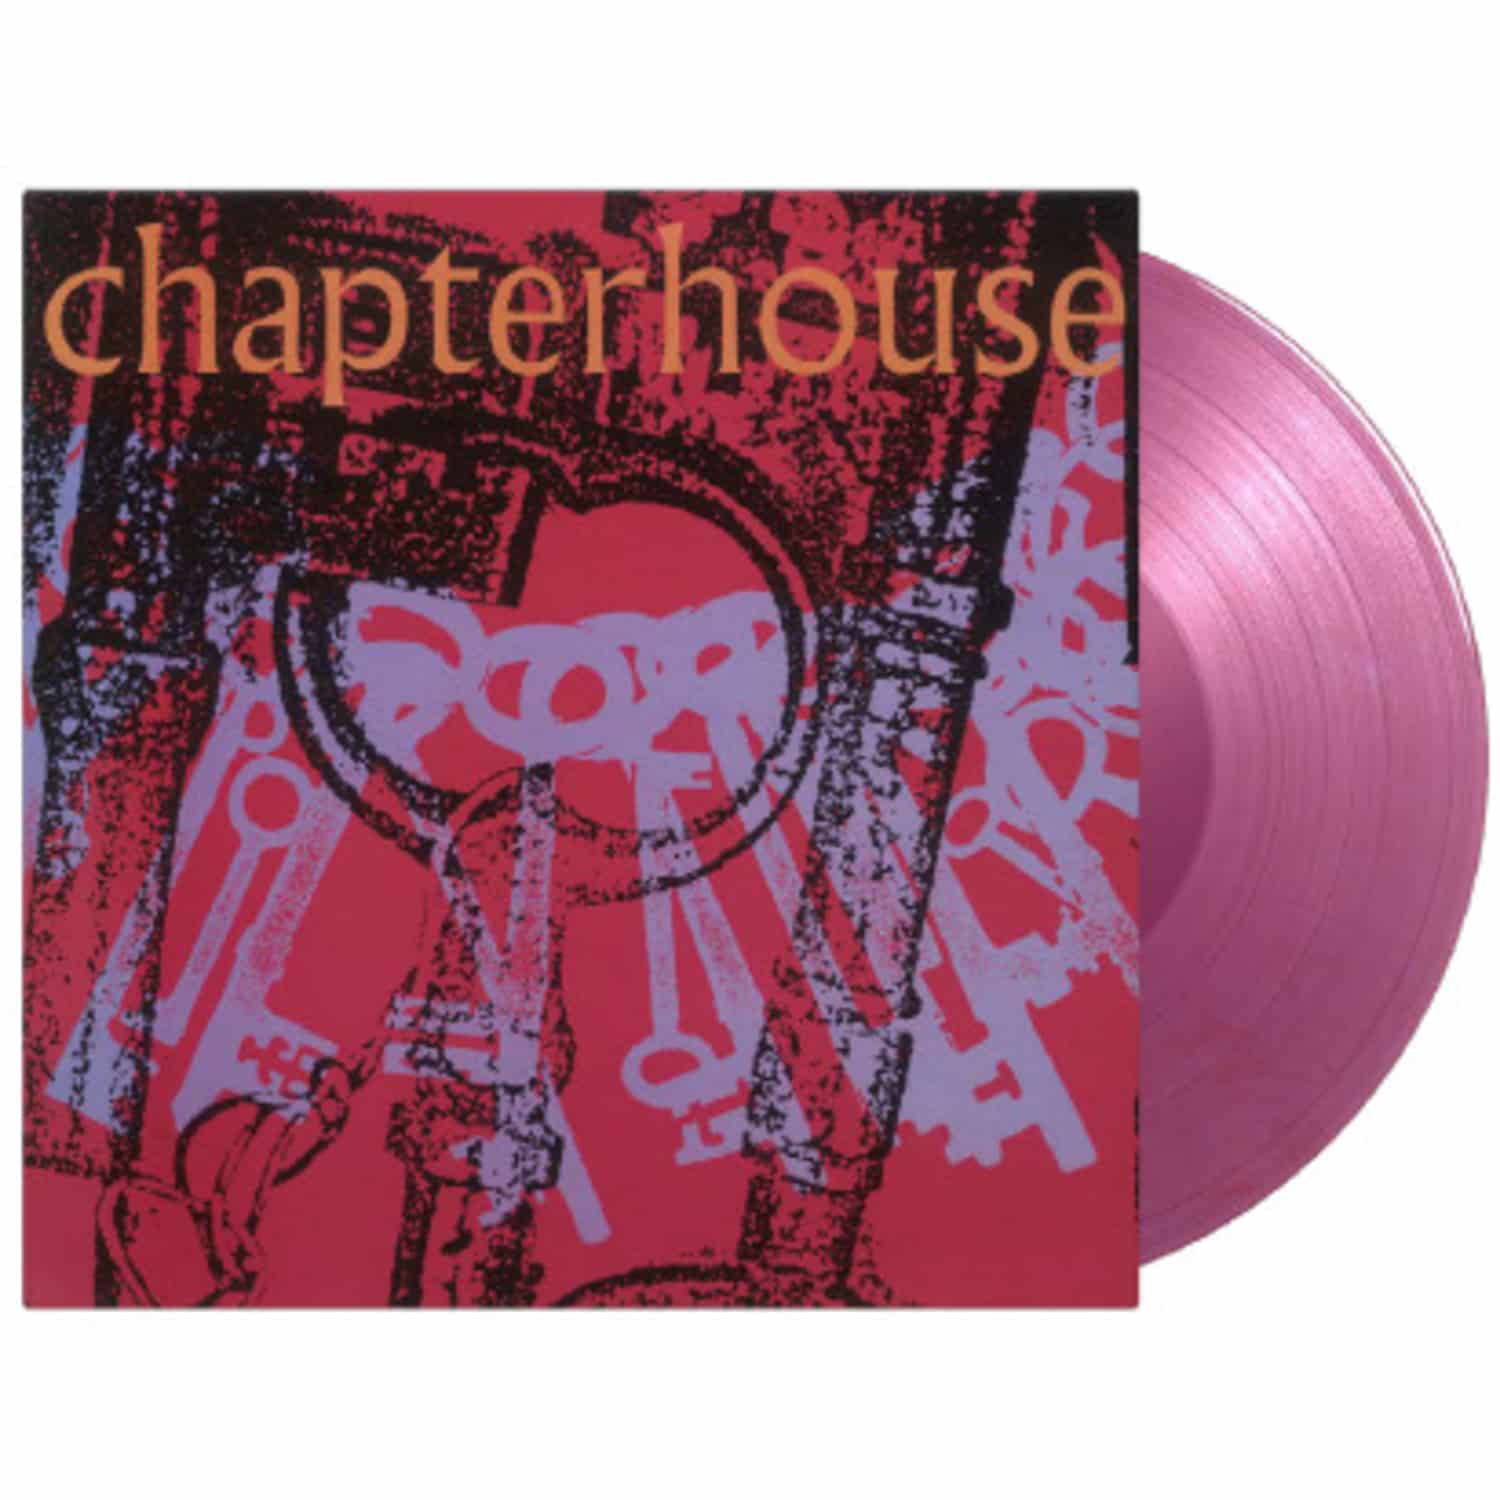 Chapterhouse - SHE S A VISION 